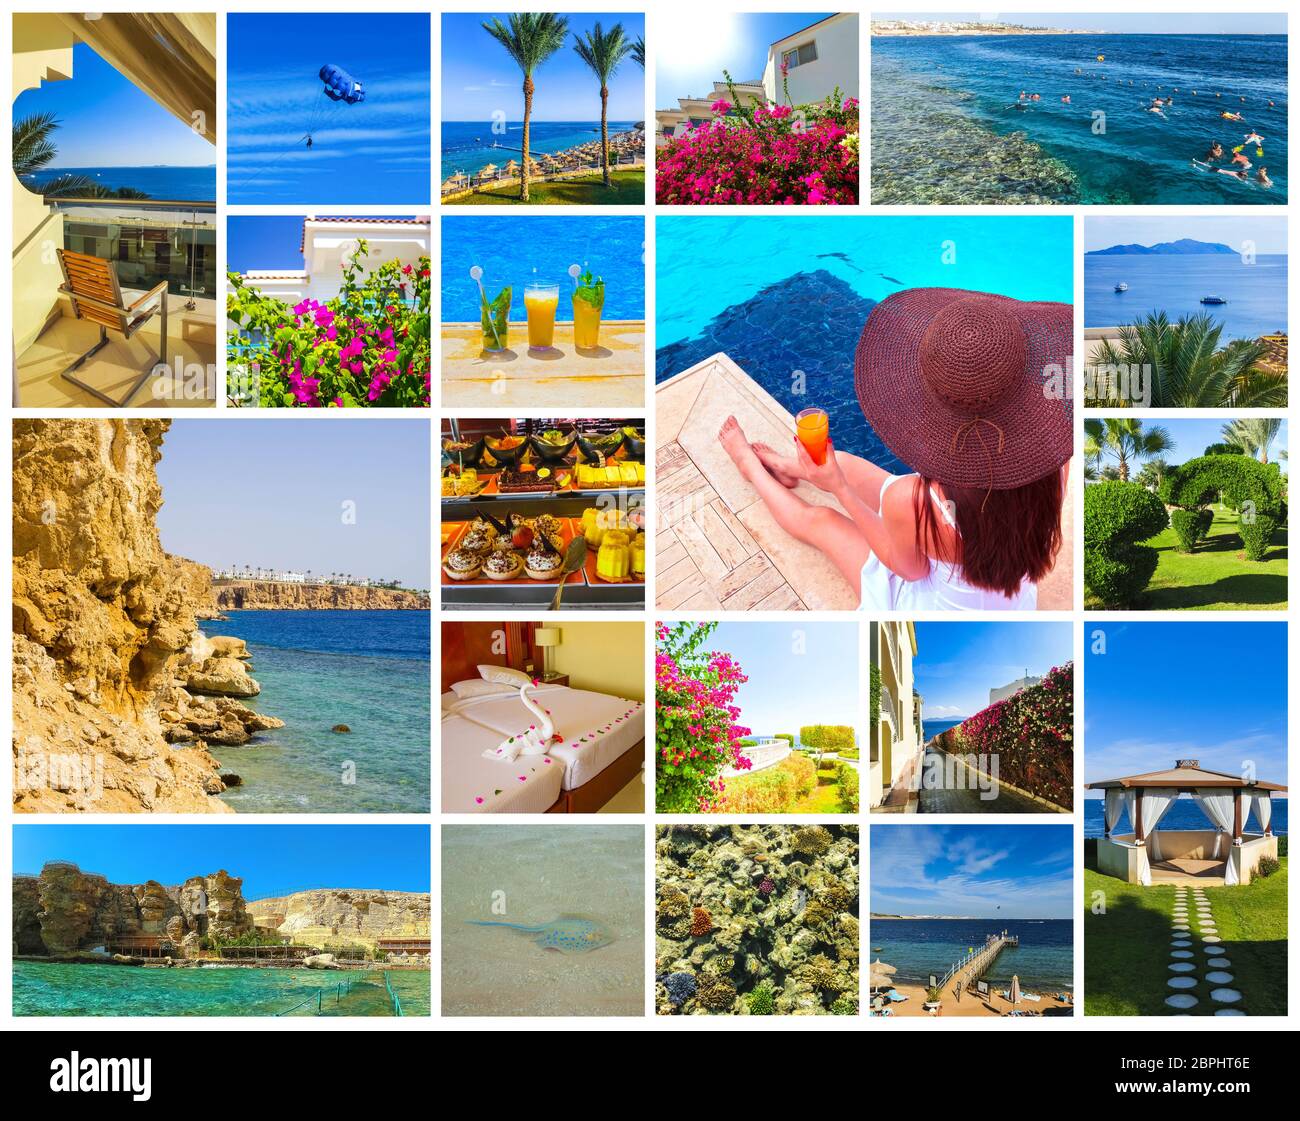 Collage of pictures from Egypt holidays at Sharm El Sheikh Stock Photo